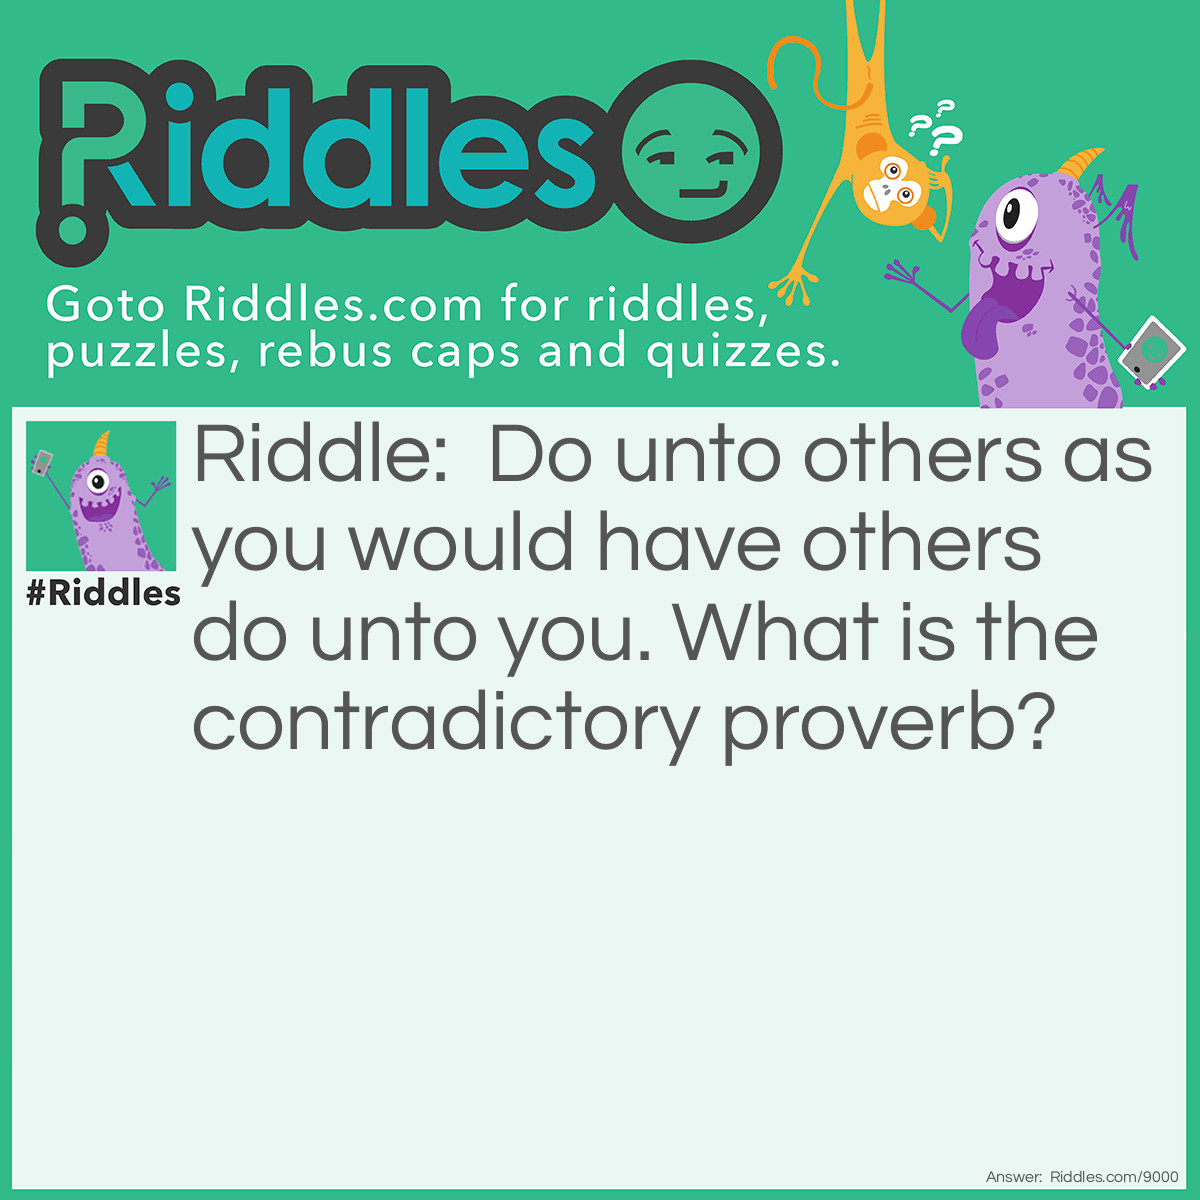 Riddle: Do unto others as you would have others do unto you. What is the contradictory proverb? Answer: Nice guys finish last.